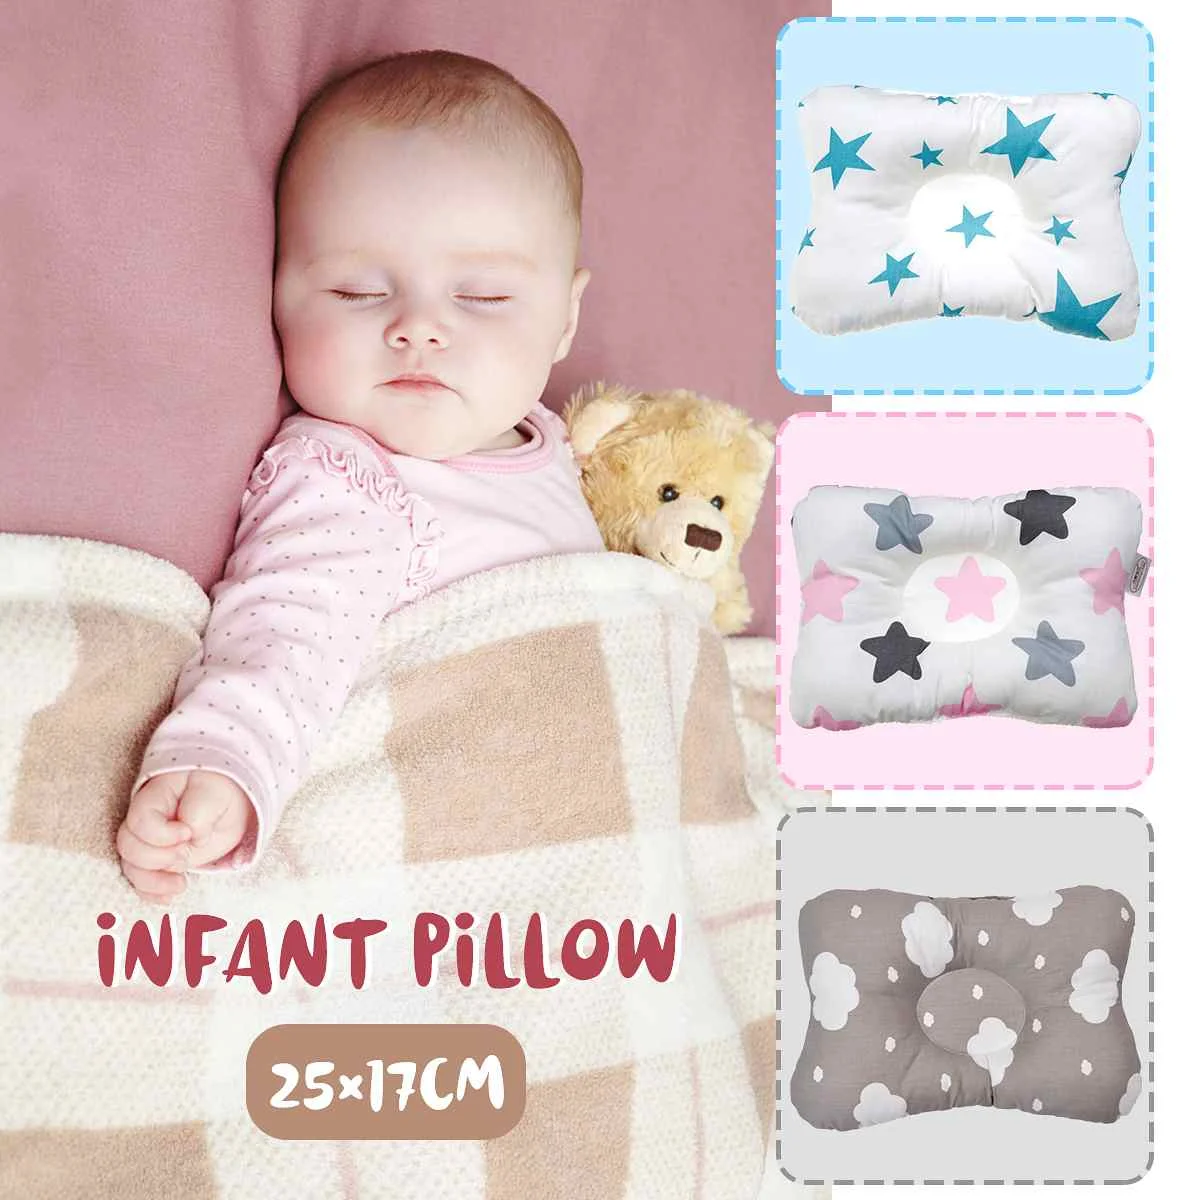 

Baby Pillow Memory Foam Newborn Baby Cotton Breathable Head Shaping Pillows To Prevent Flat Head Ergonomic Head Syndrome US